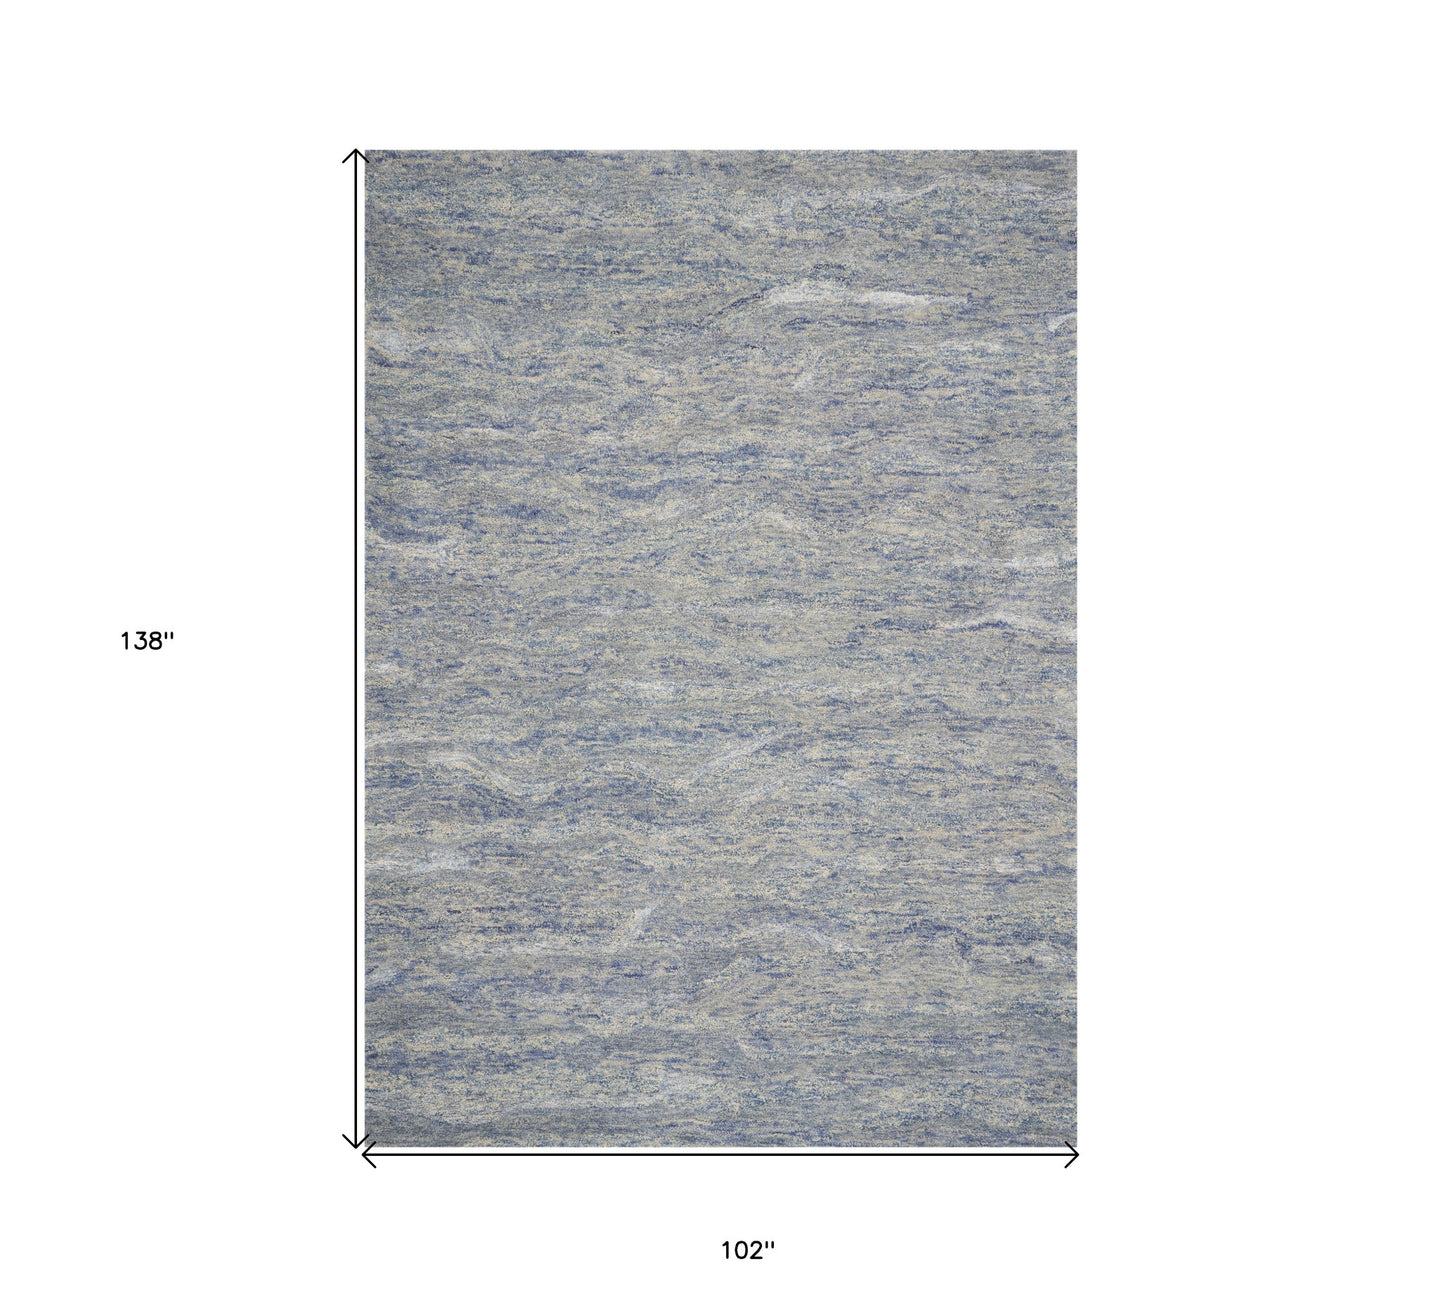 7 X 9  Wool And  Viscose Ocean Blue Area Rug